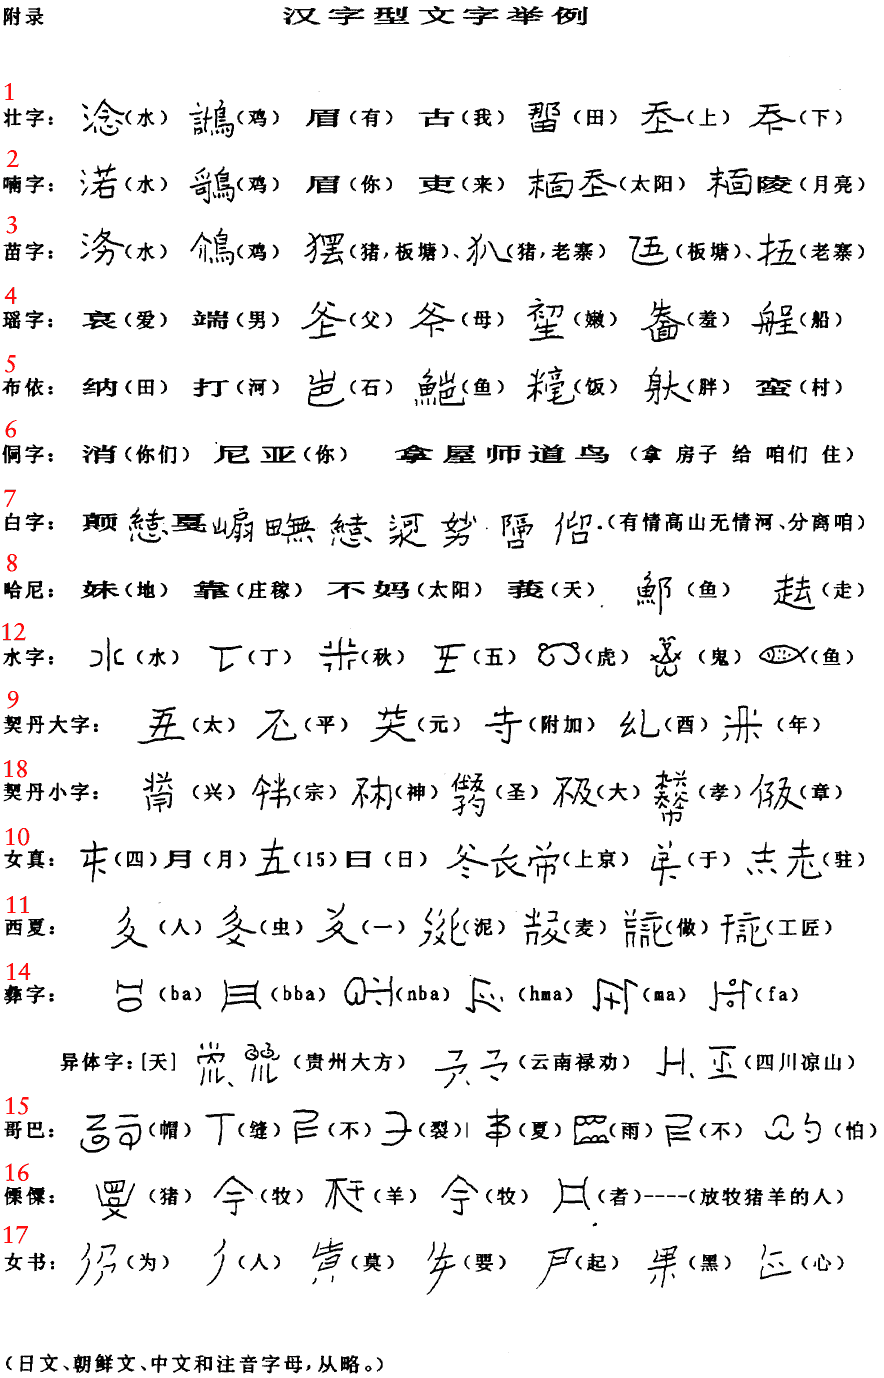 meaning-chinese-letters-fulfere